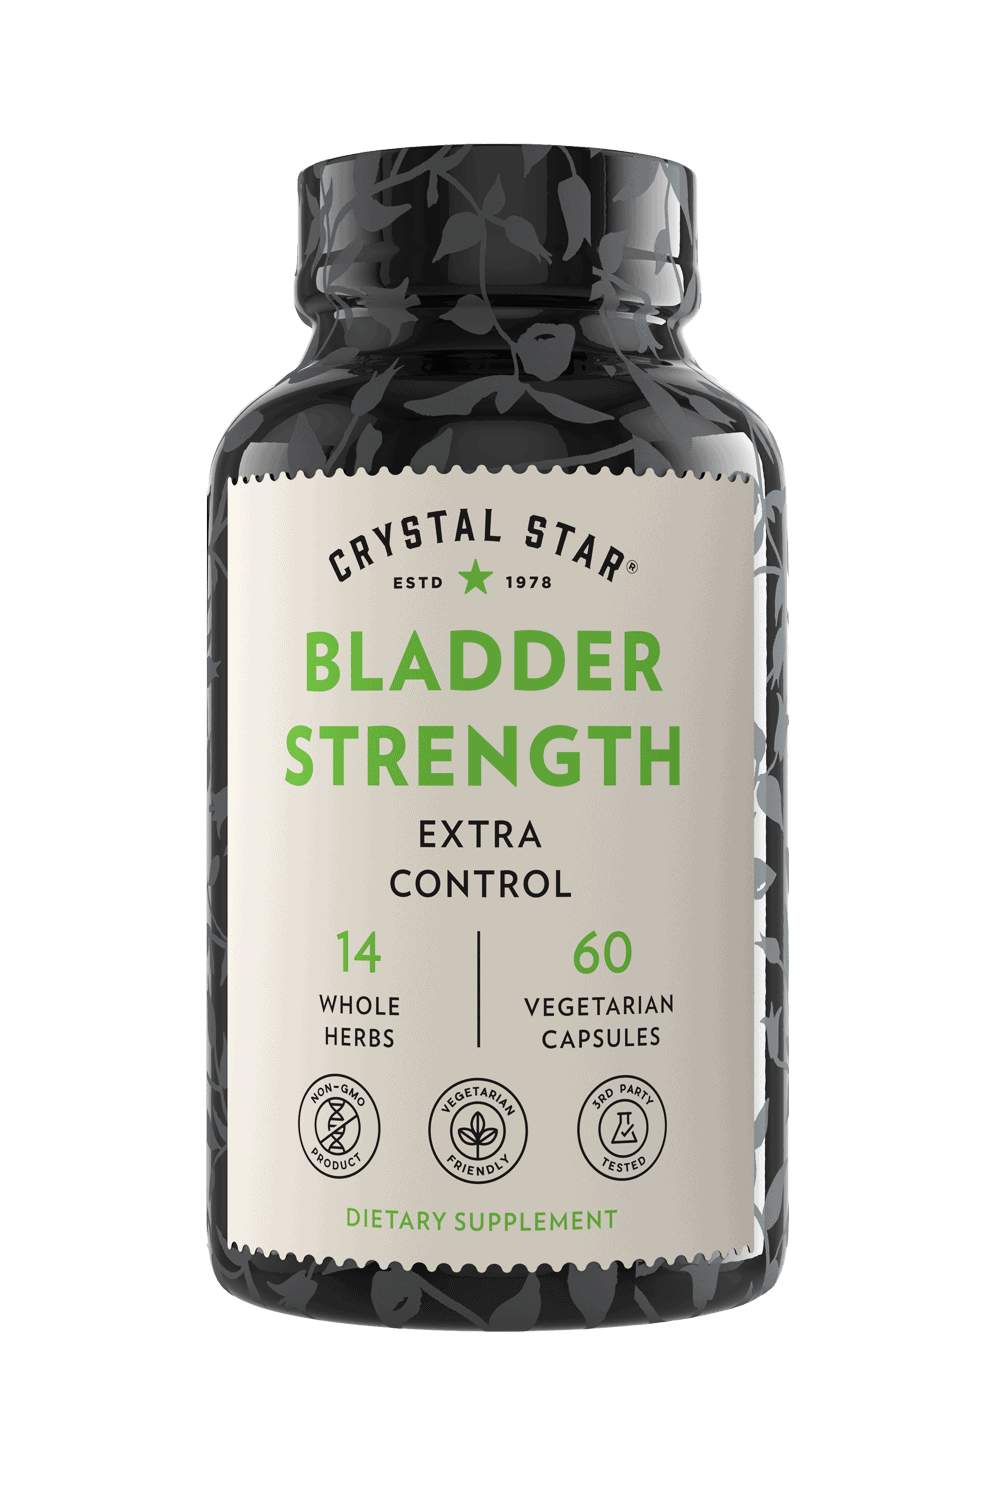 Crystal Star Bladder Strength, bladder control, overactive bladder, bladder incontinence, urinary incontinence, incontinence supplements, UTI, uti, uti treatment, extra strength, herbal extracts, Pumpkin Seed Extract, Cranberry Extract, White Willow Bark Extract, urinary tract infection treatment, urinary tract health, cranberry pills, cranberry capsules, pumpkin seed